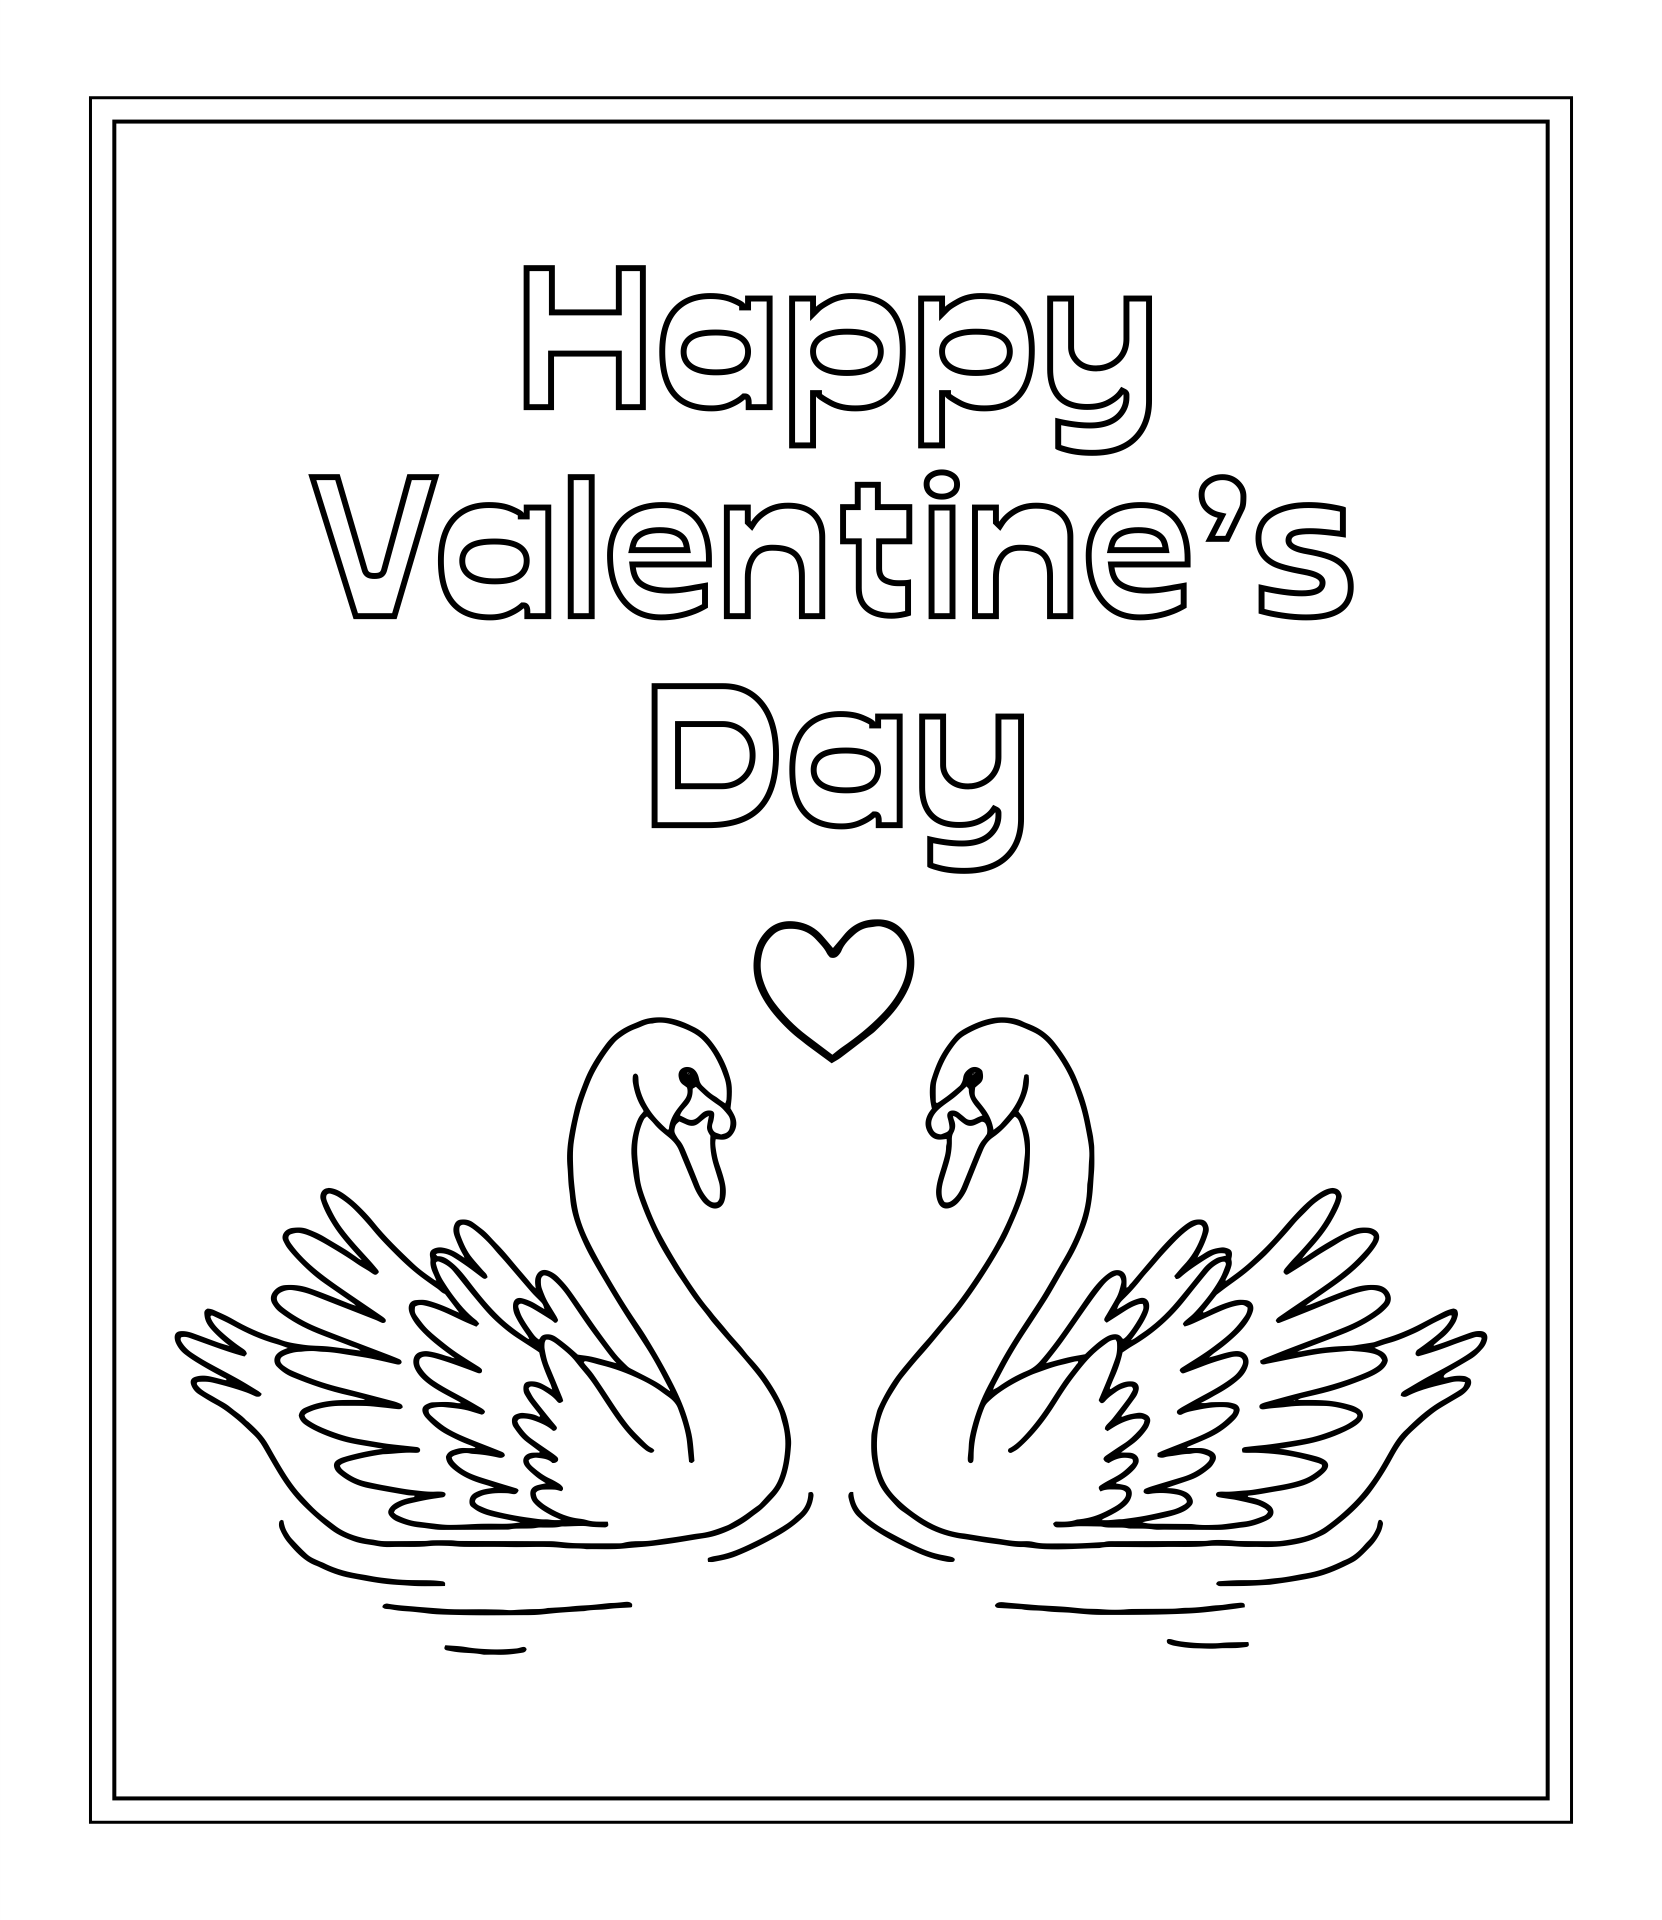 Printable Valentines Day Cards to Color